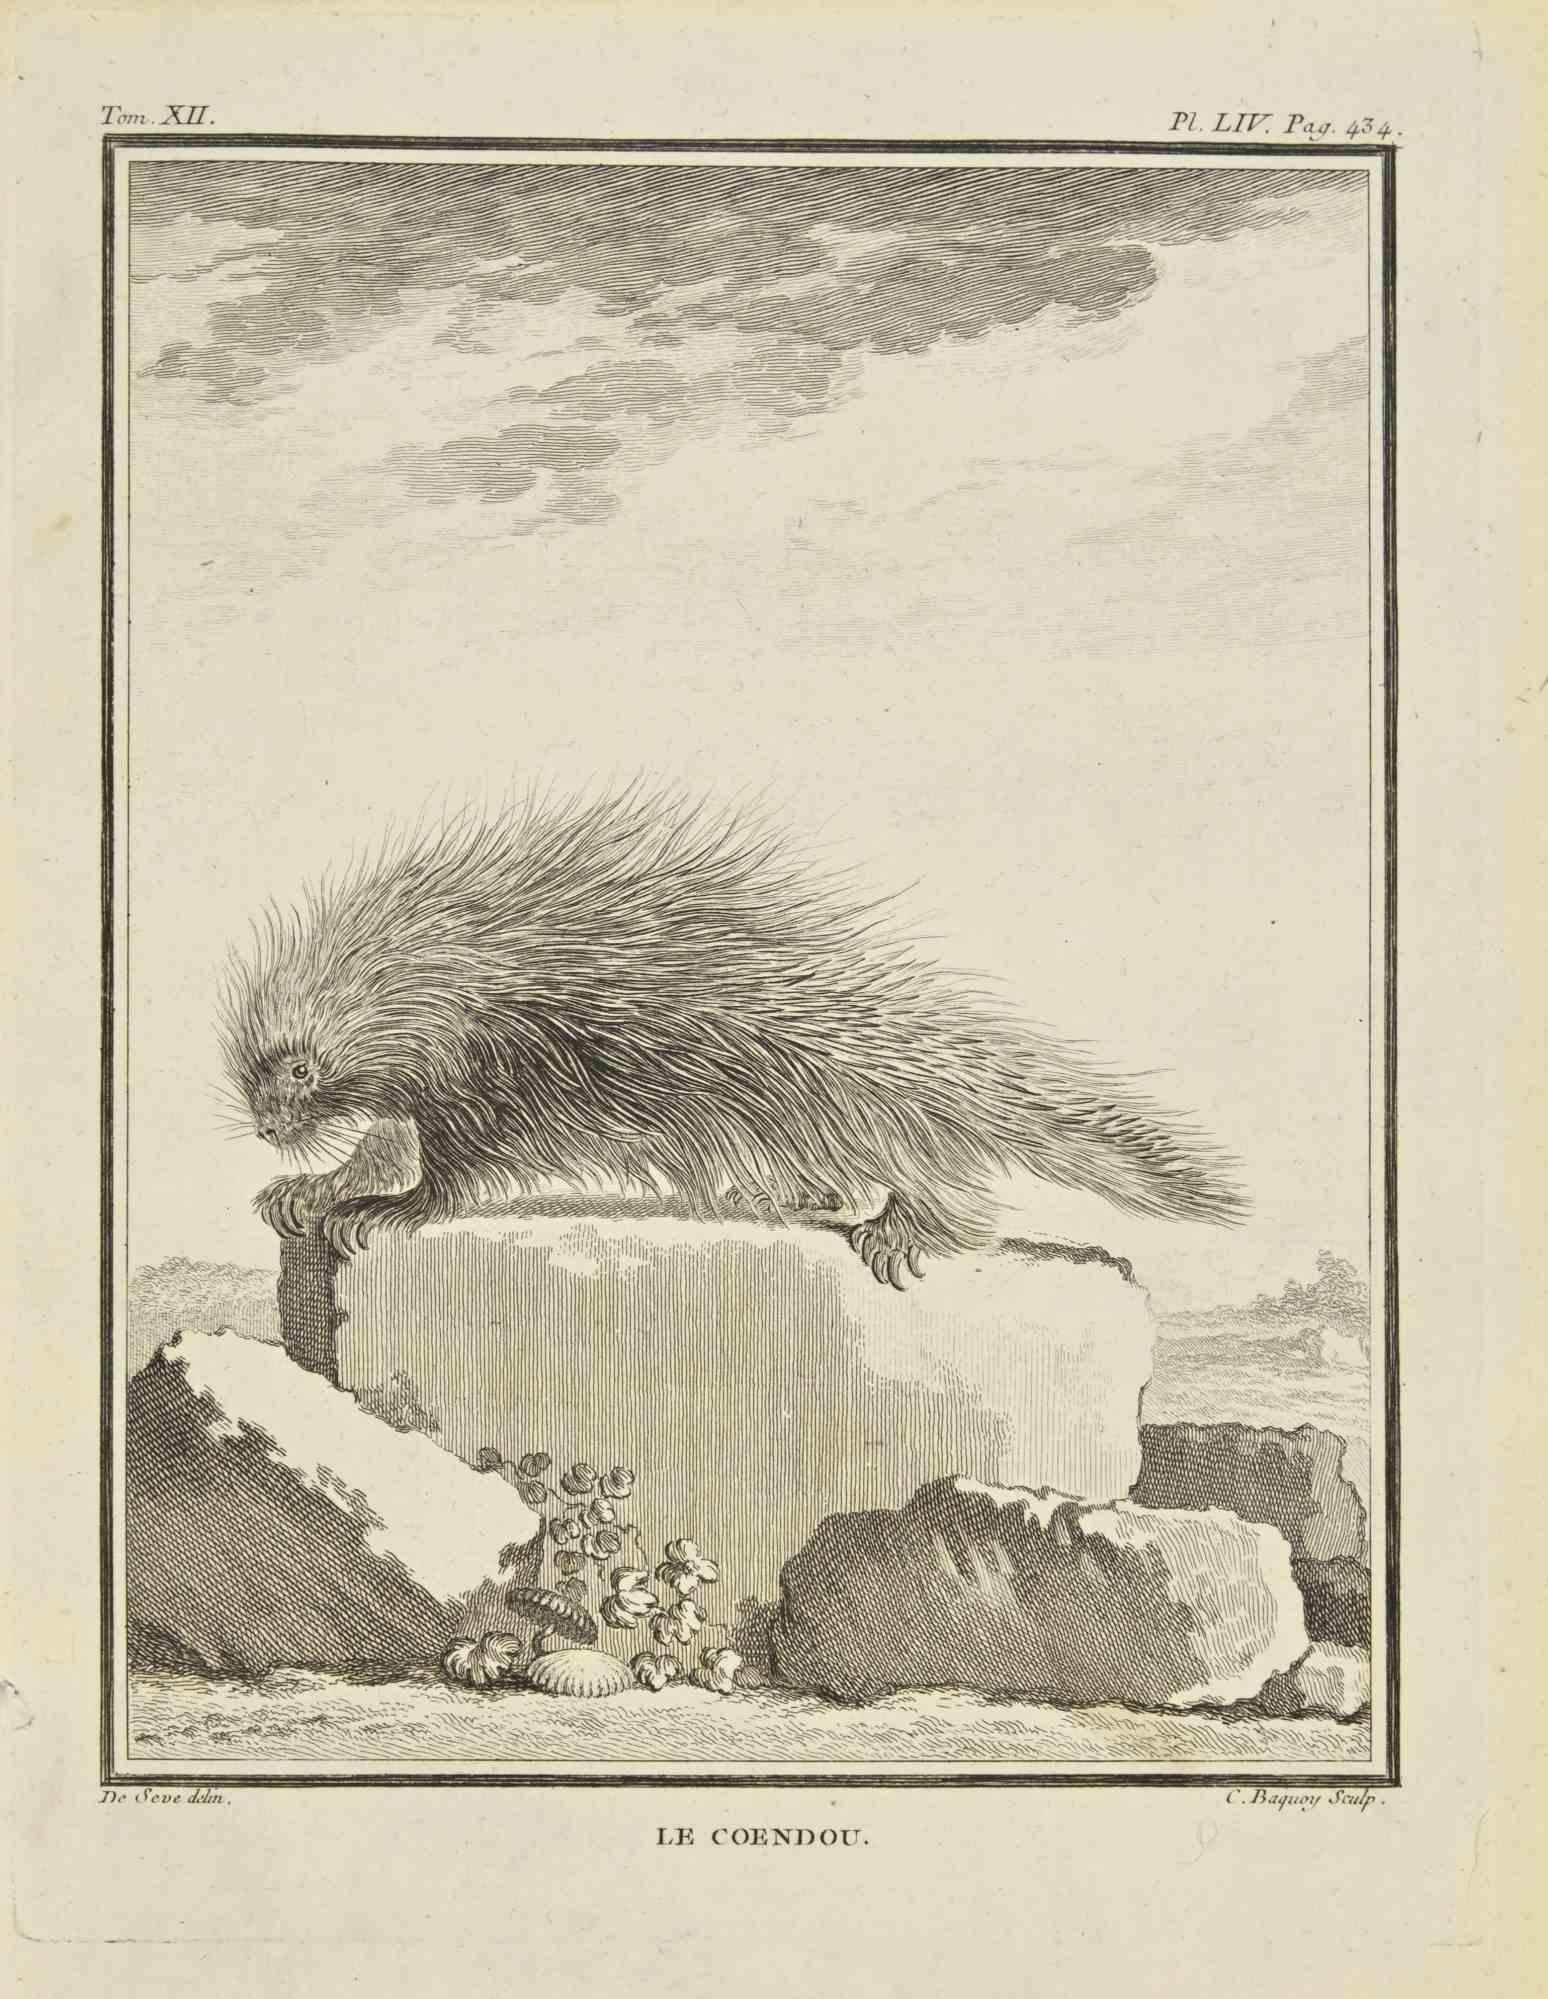 Le Coendou is an etching realized by Jean Charles Baquoy in 1771.

It belongs to the suite "Histoire Naturelle de Buffon".

The Artist's signature is engraved lower right.

Good conditions